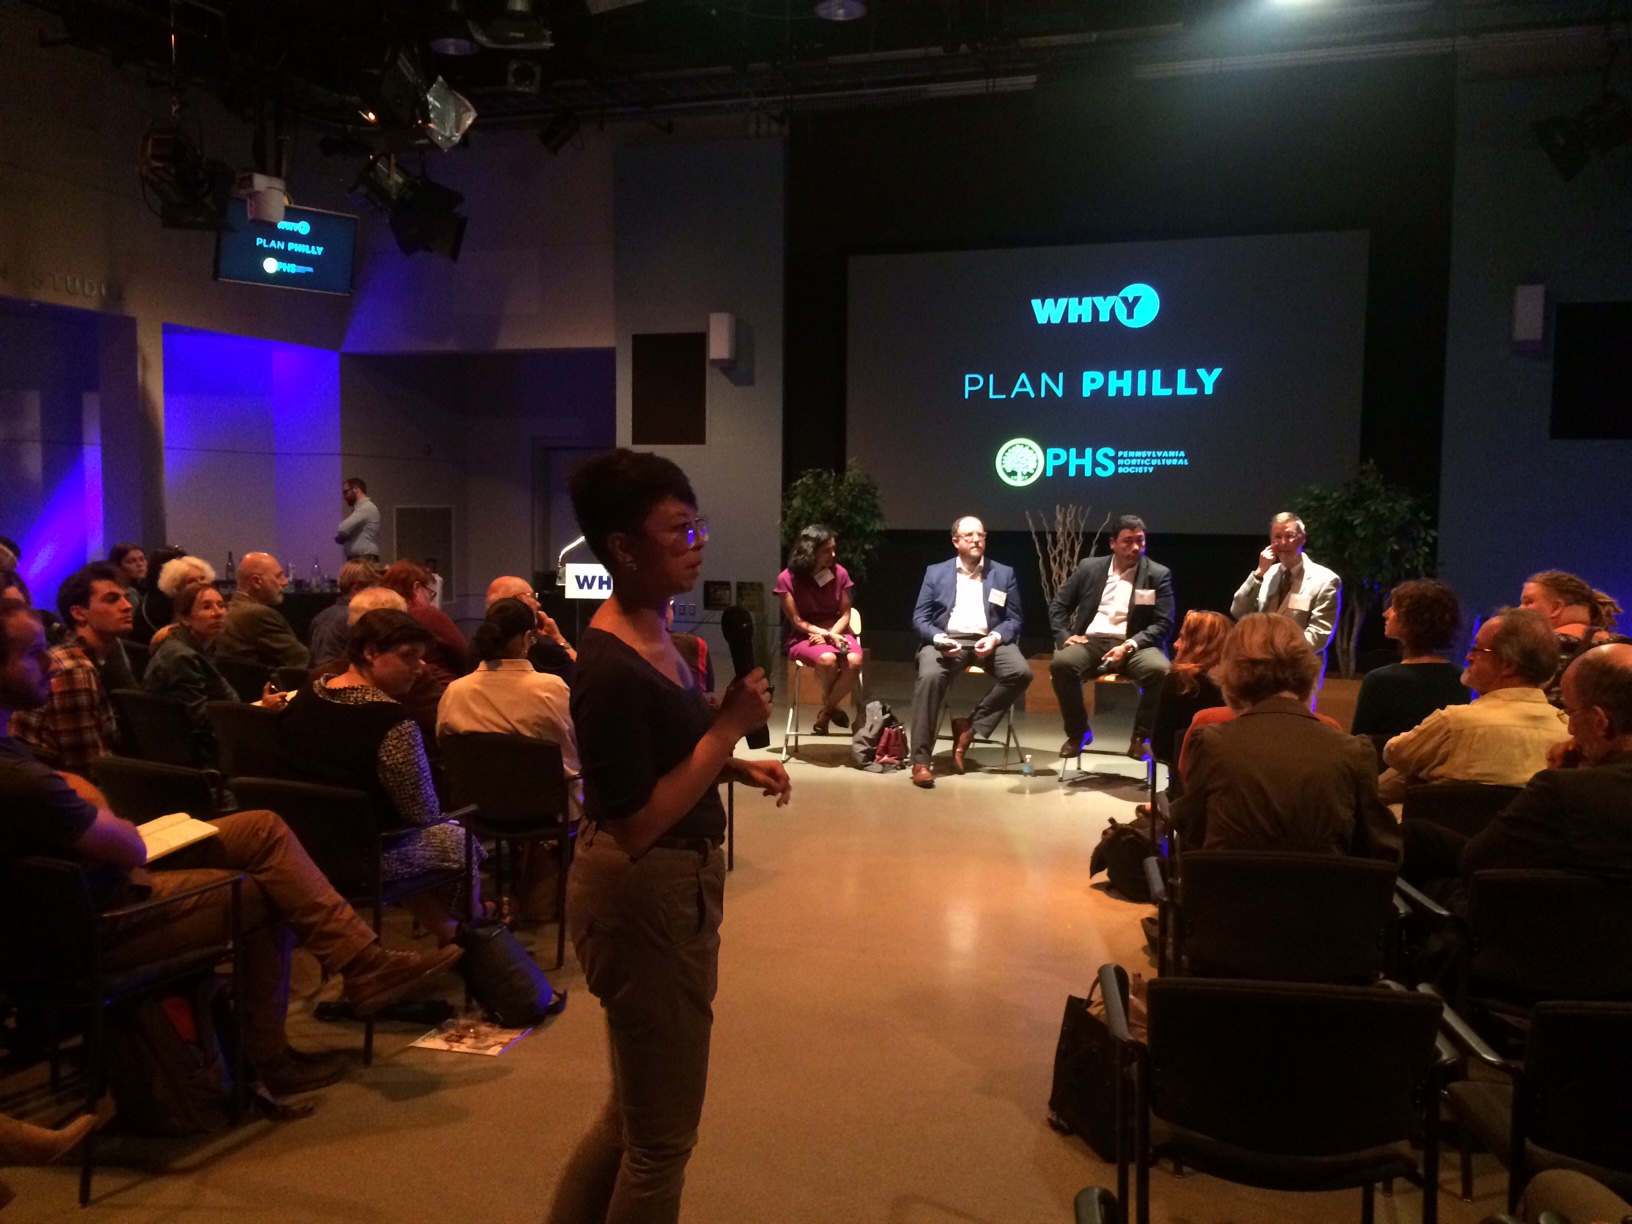 Diana Lu repeats audience question in back at PlanPhilly public spaces panel. Credit: Catalina Jaramillo/WHYY